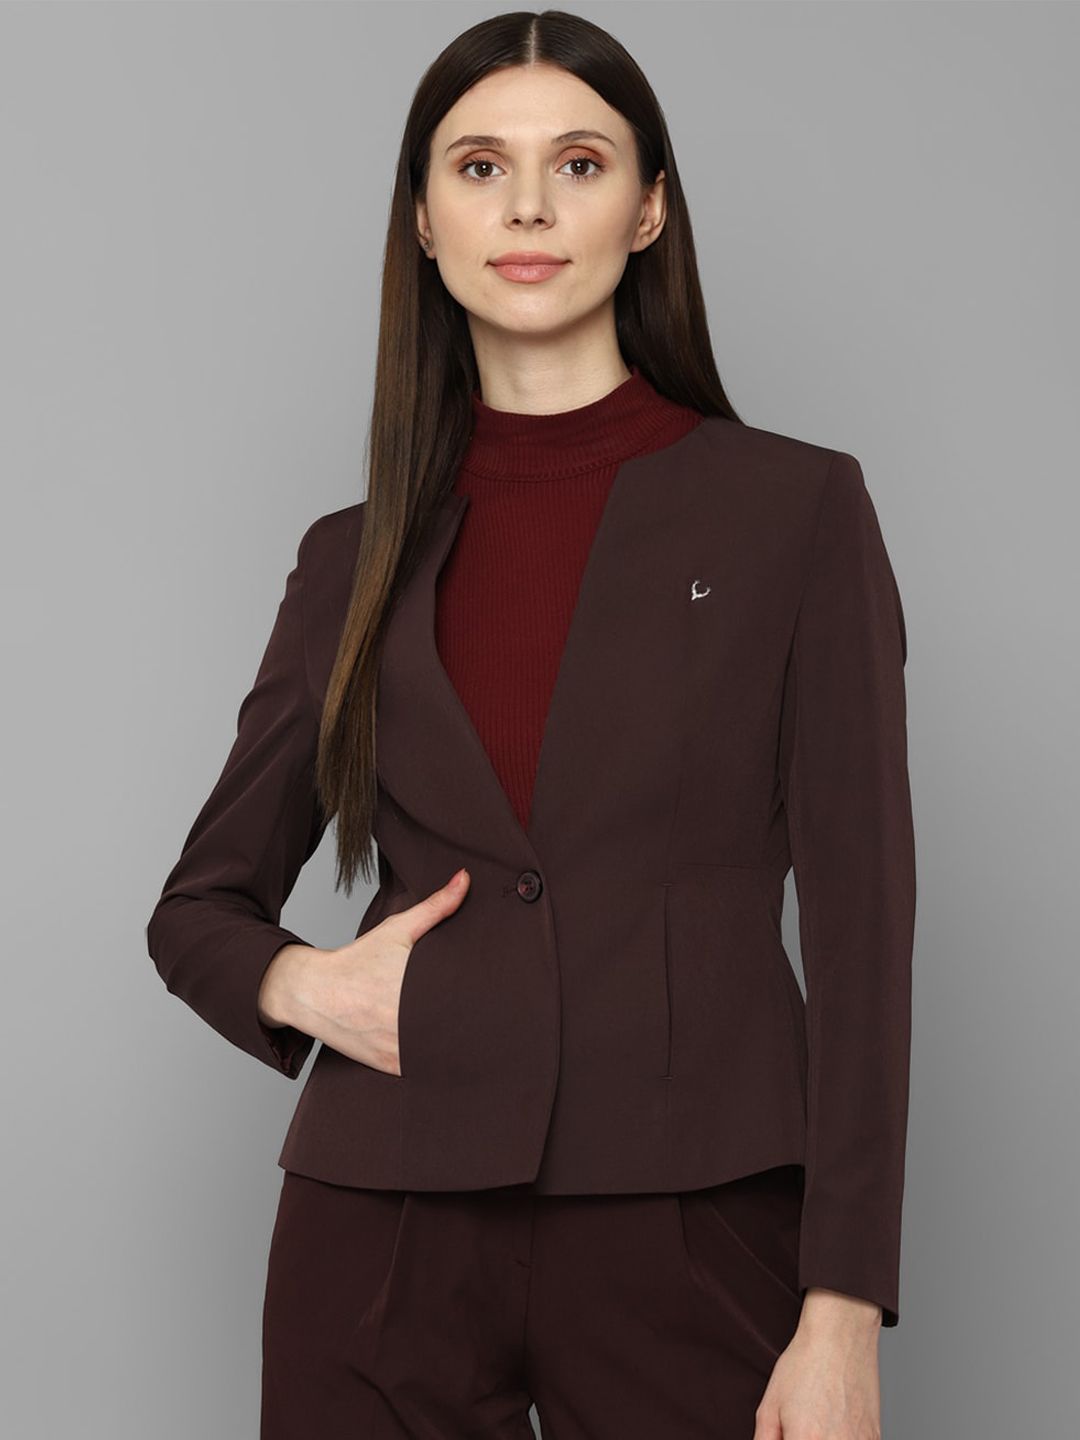 Allen Solly Woman Women Maroon Solid Single Breasted Slim Fit Blazer Price in India